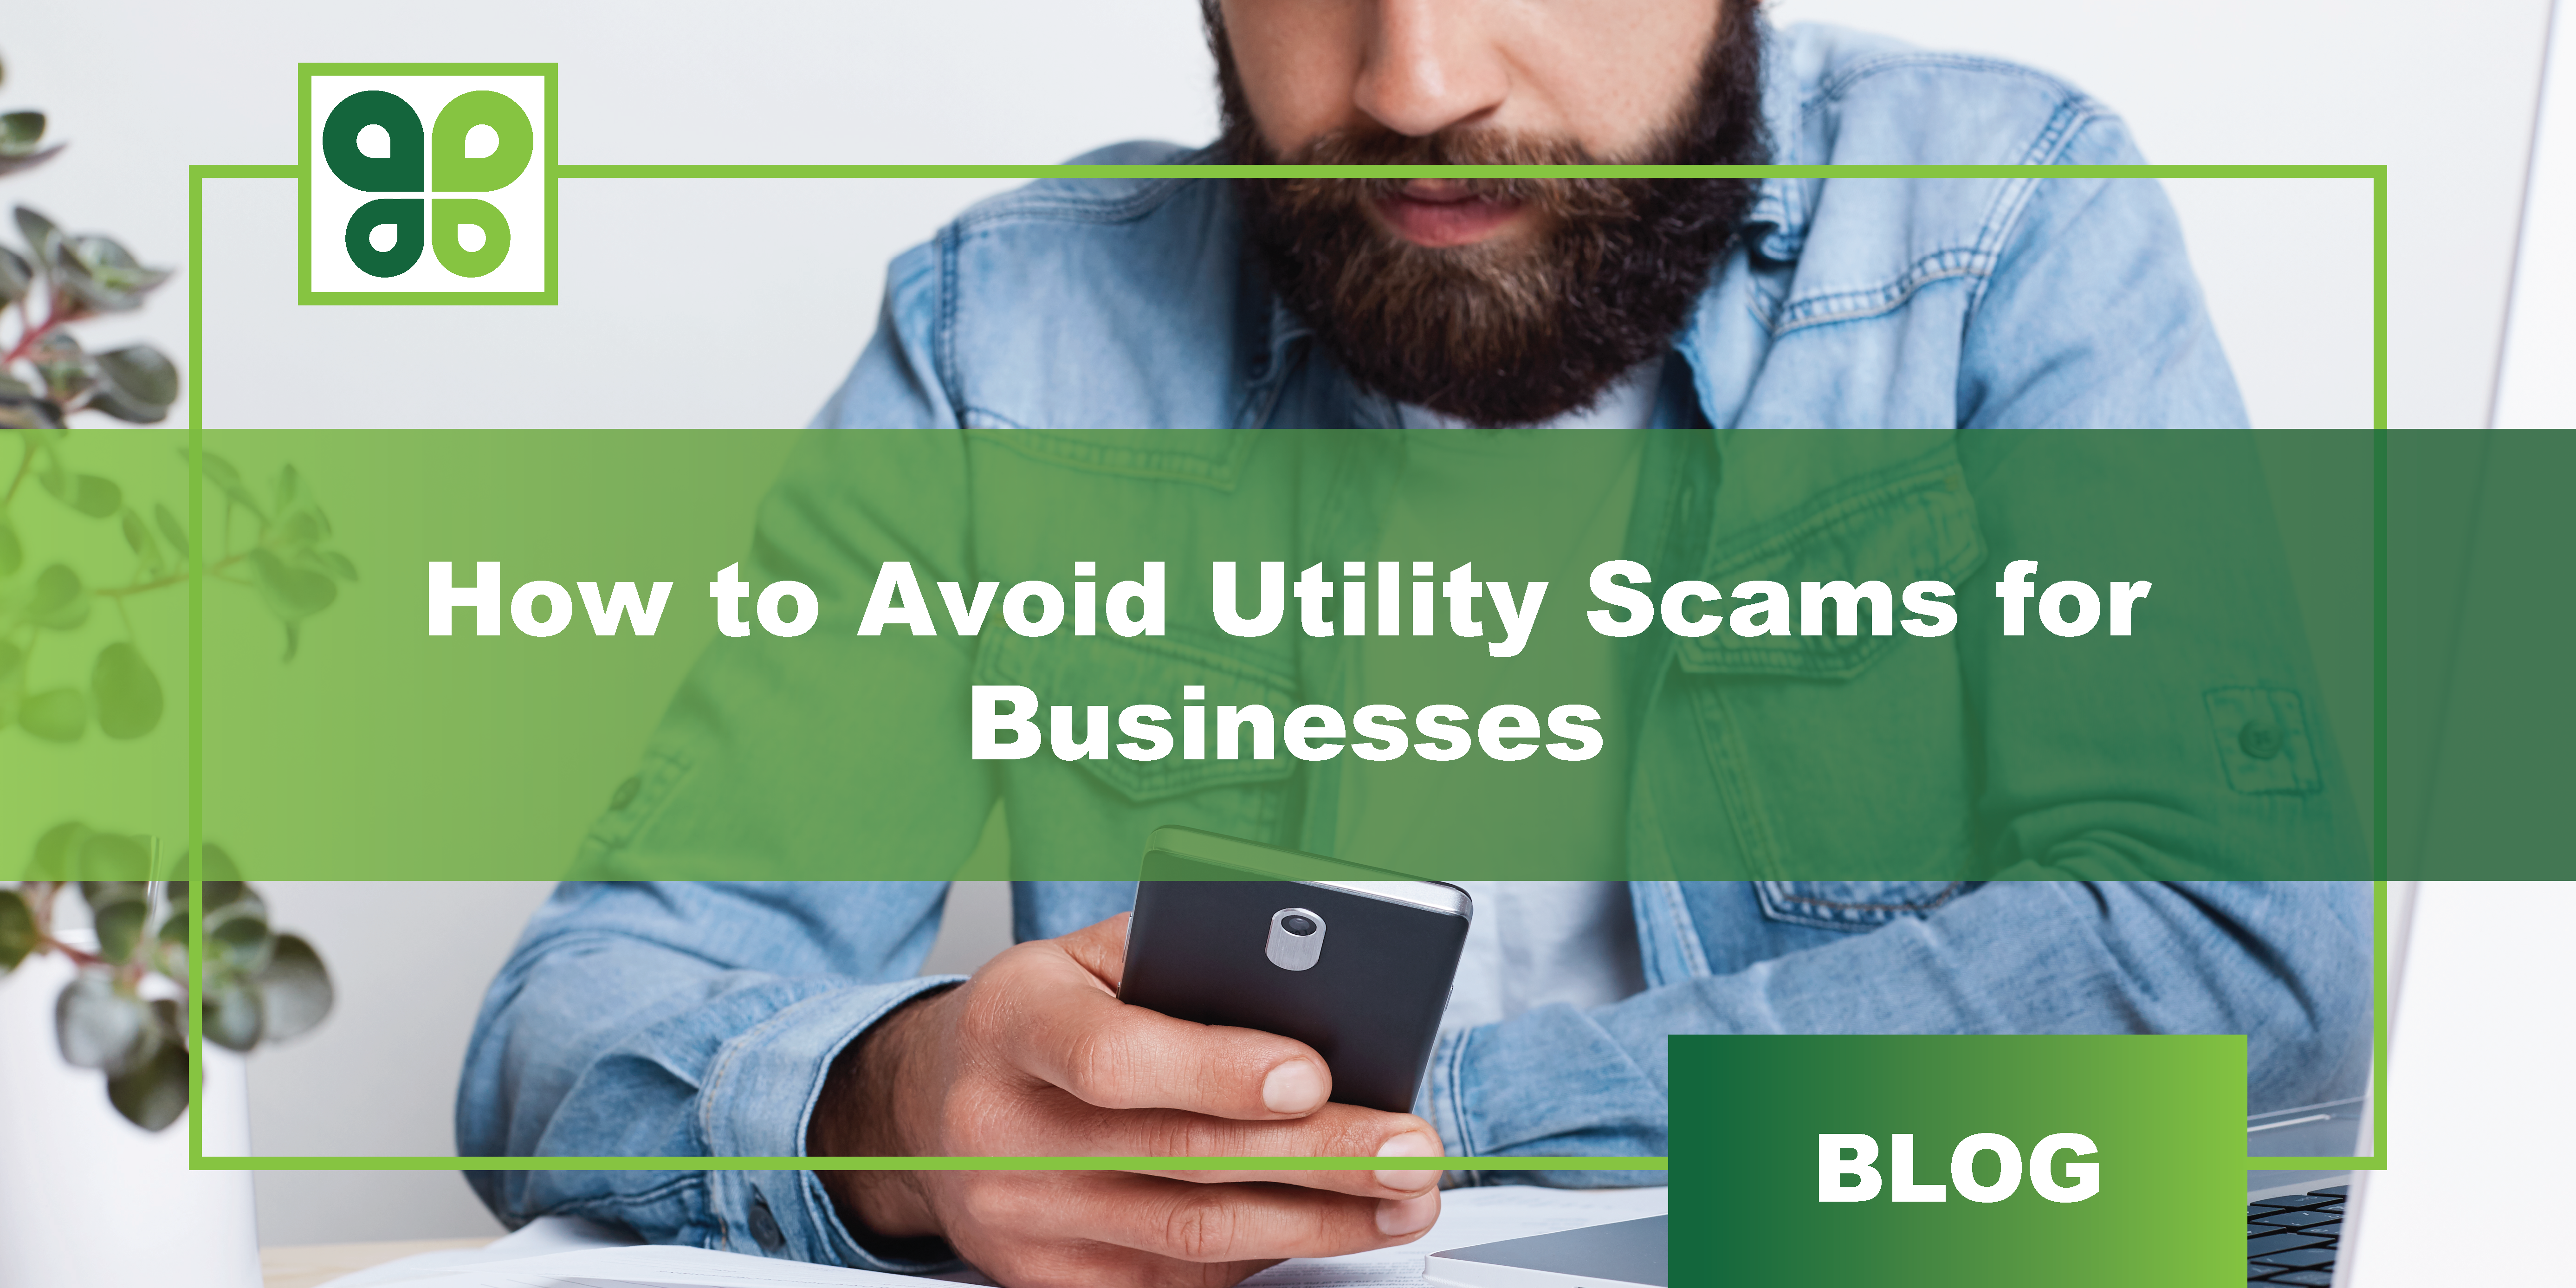 How to Avoid Utility Scams for Businesses